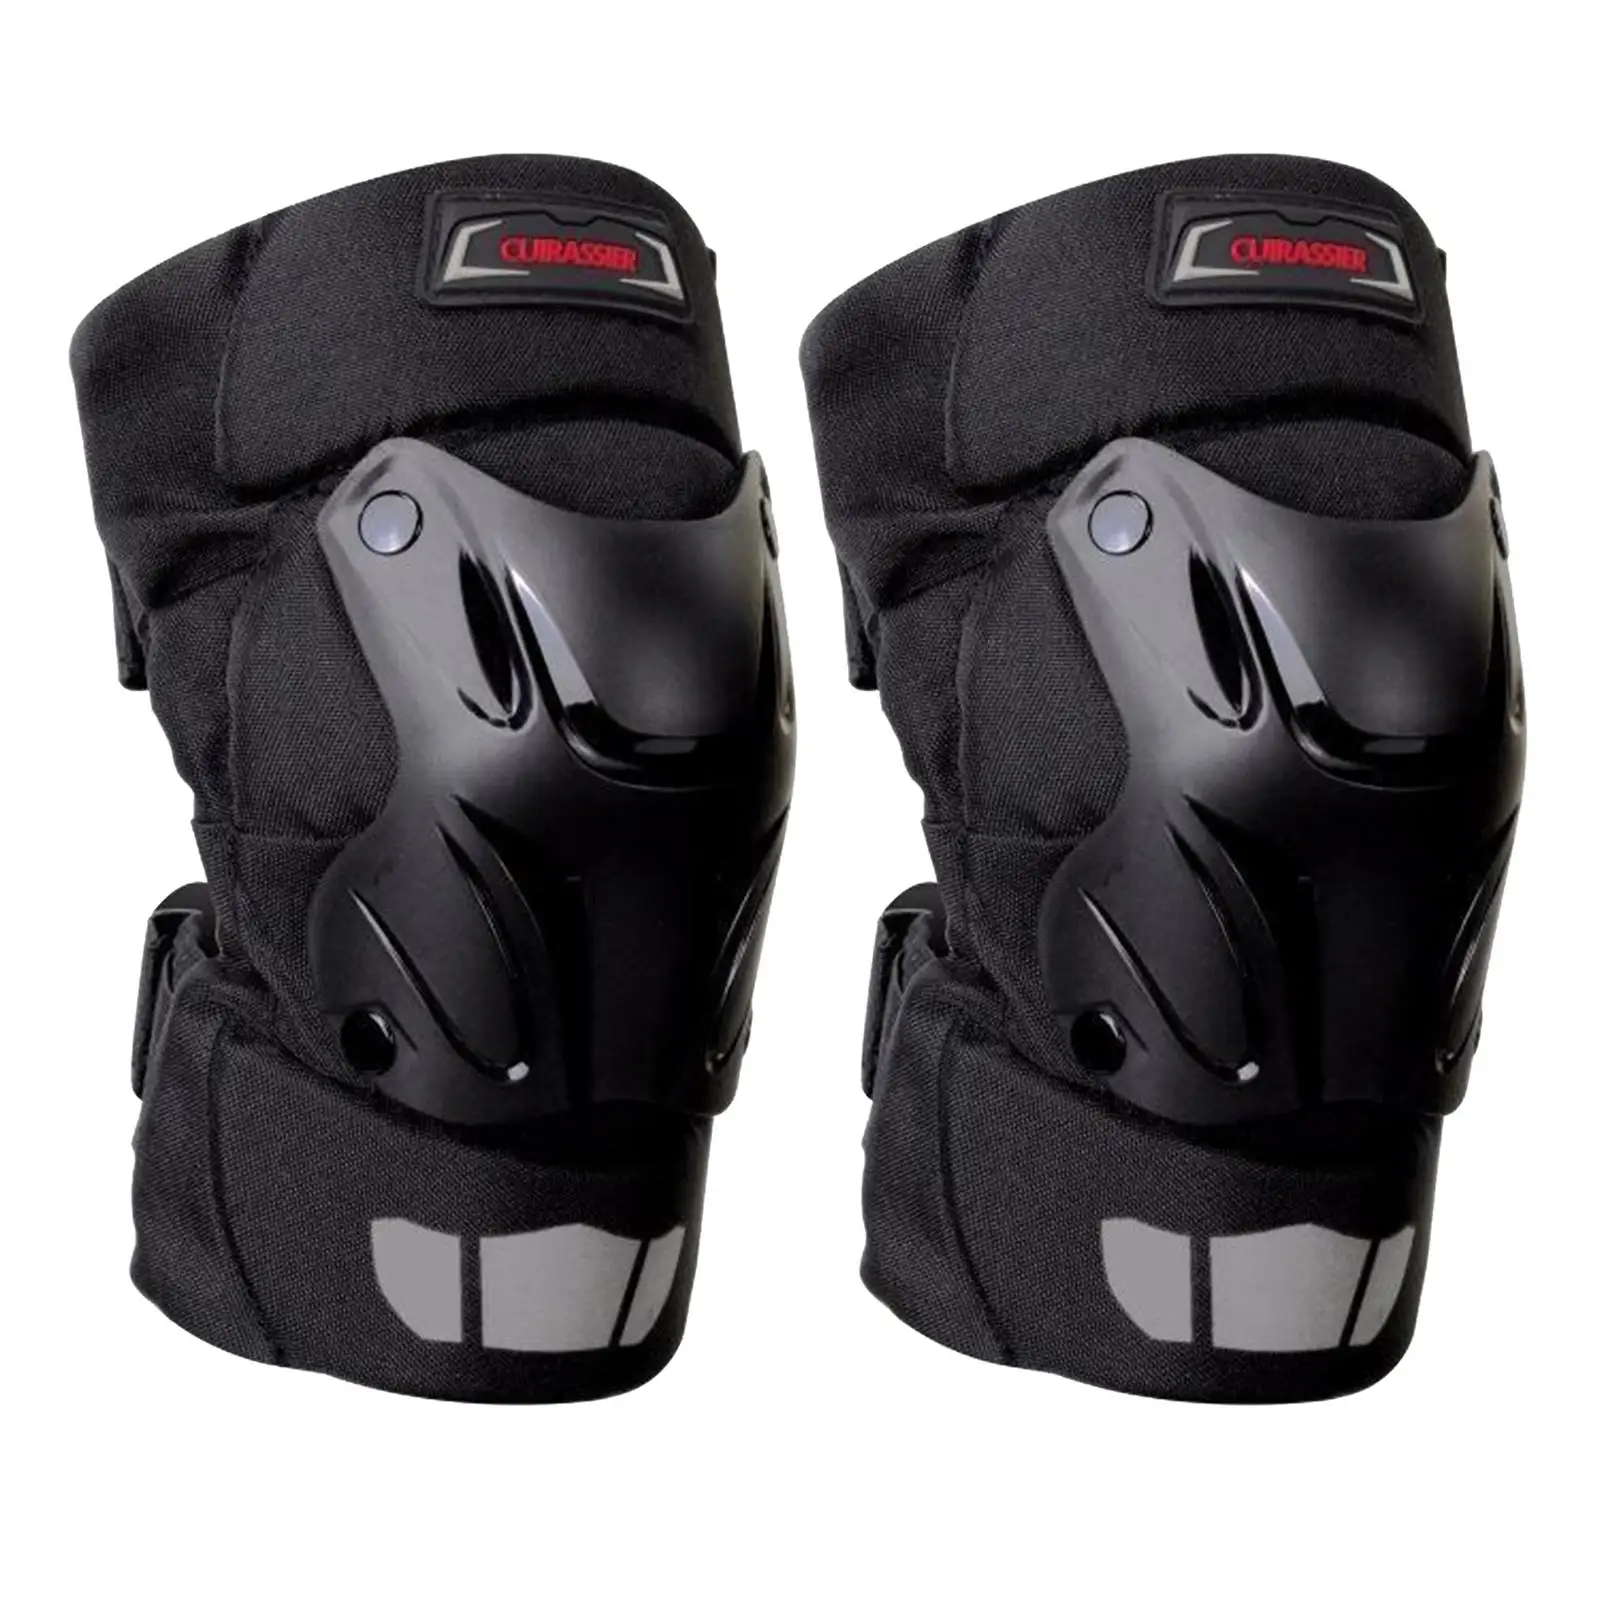 1 Pair Racing Motorcycle Knee Protection Pad Gear Guard Shock Proof Safety Off Road